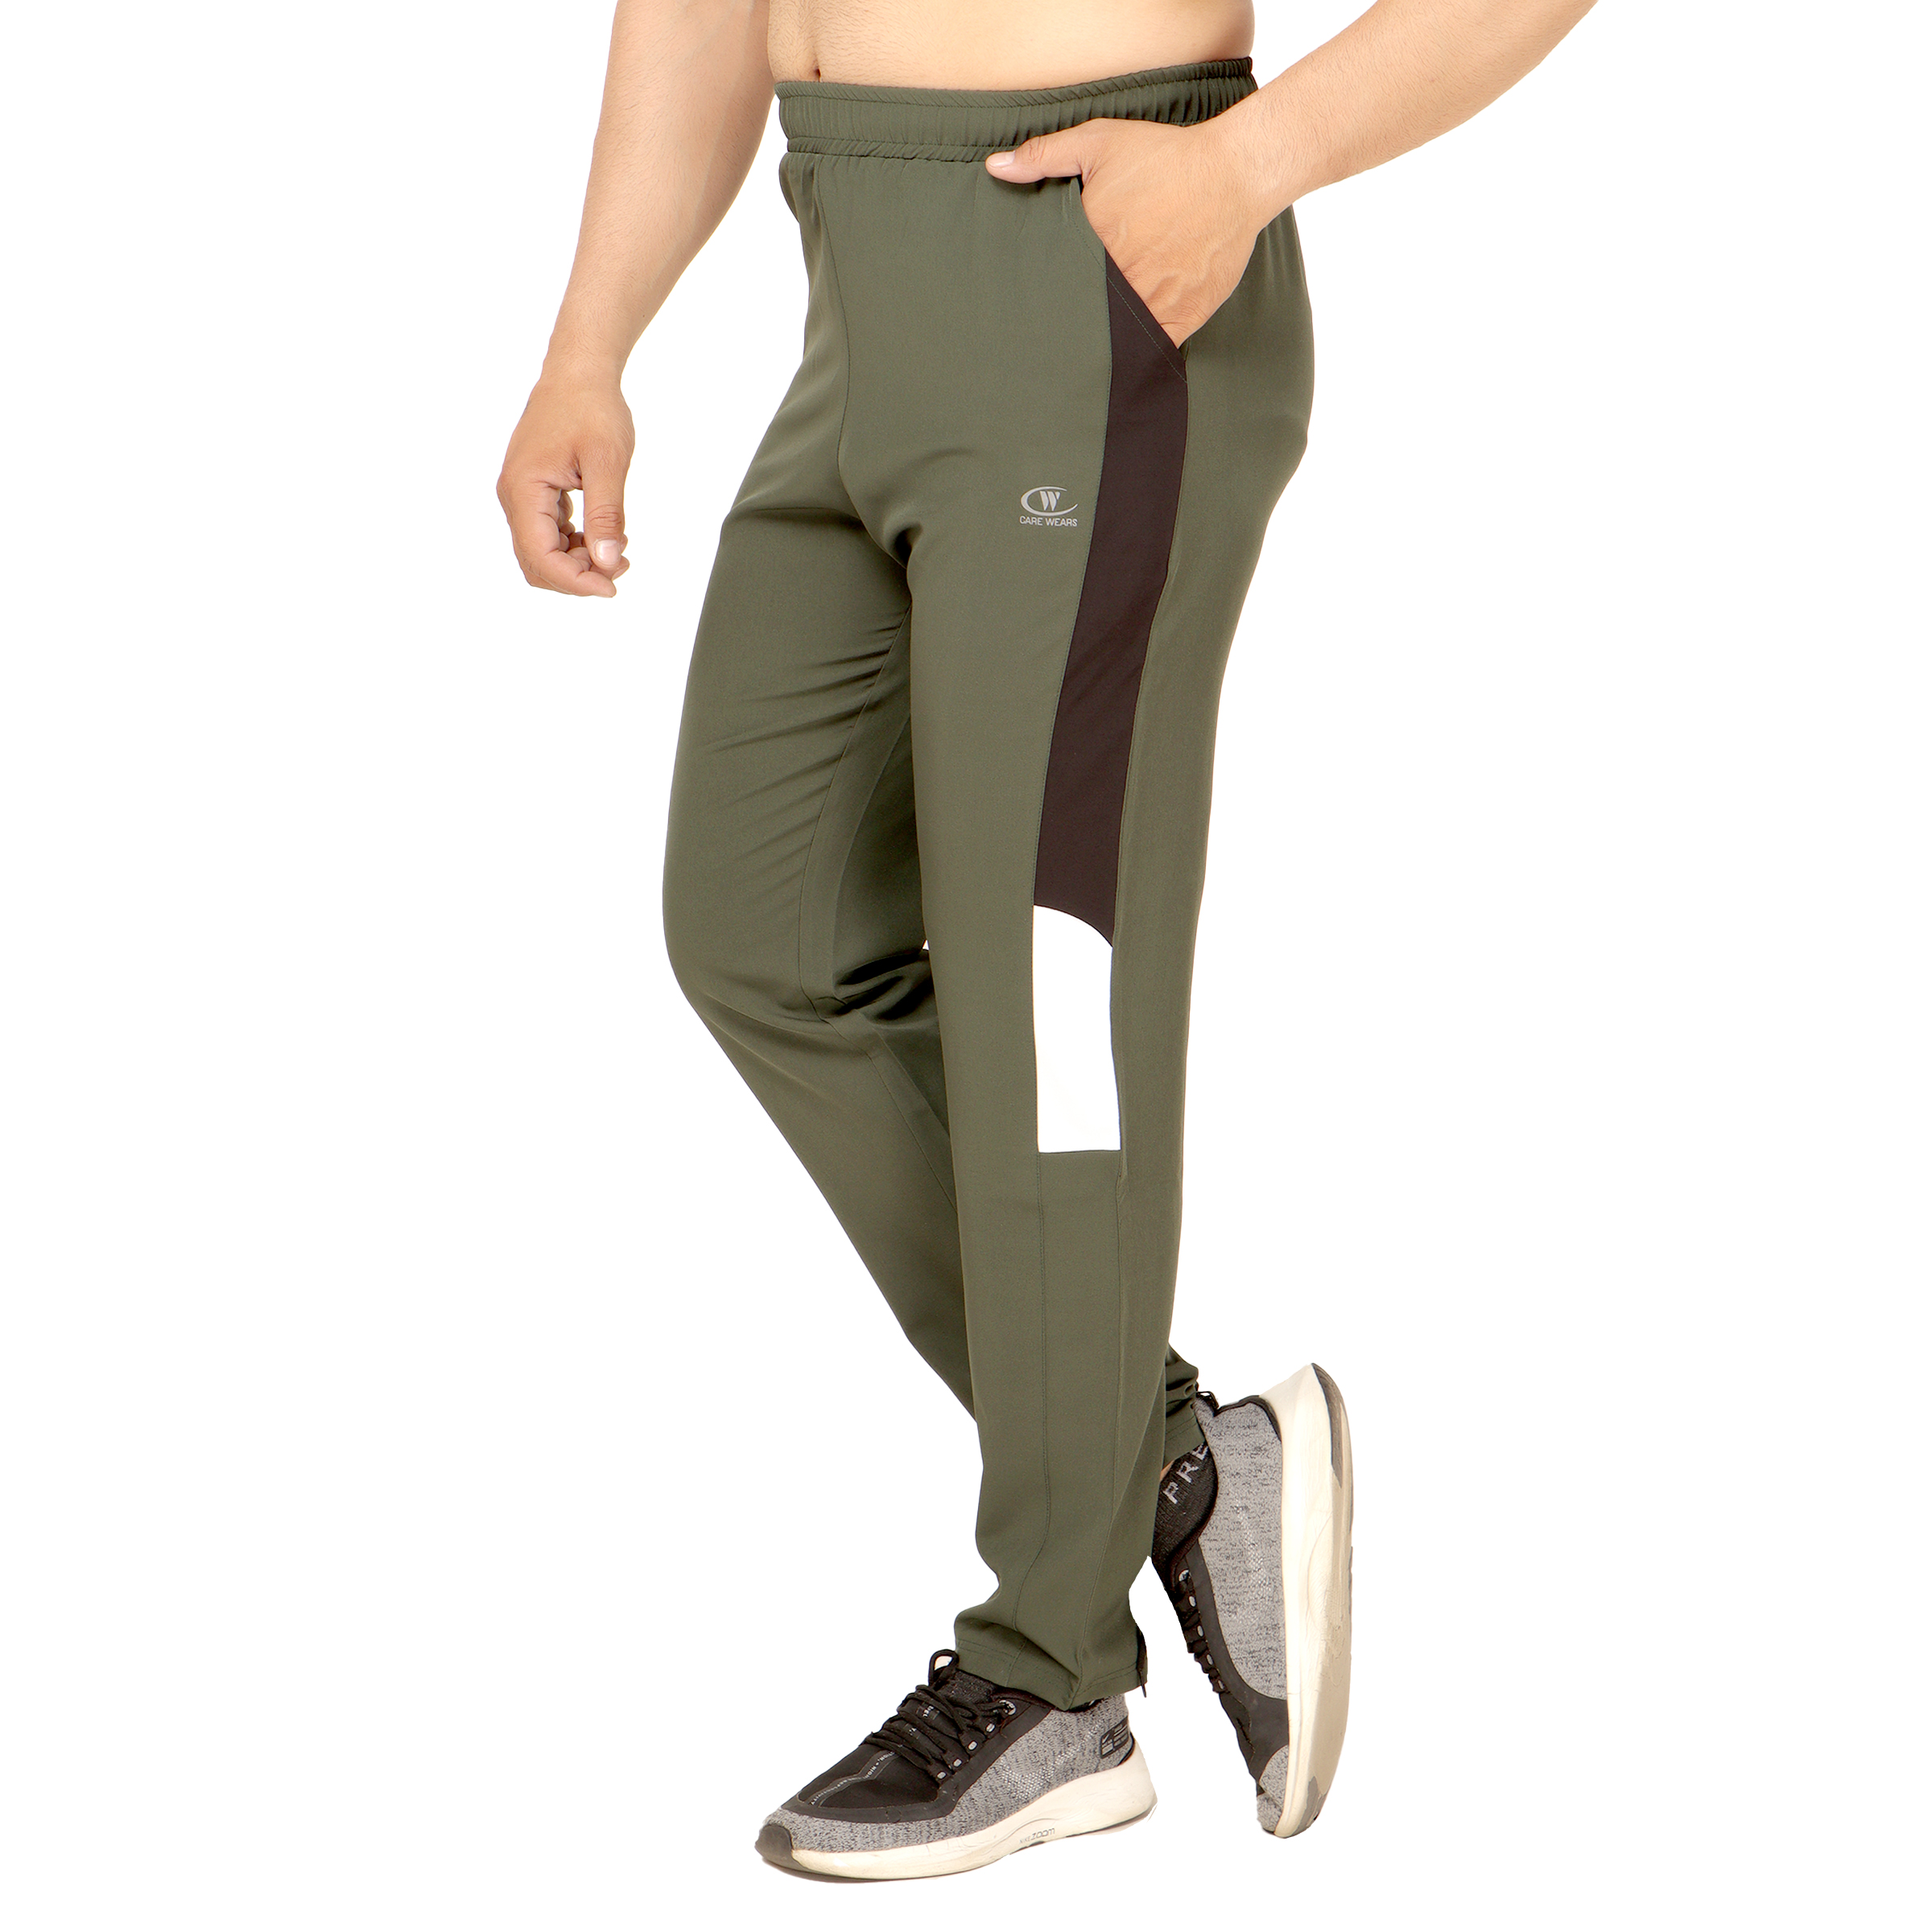 Men's Reflective Track Pants: Slim Fit, Night Running, Hip Hop Style